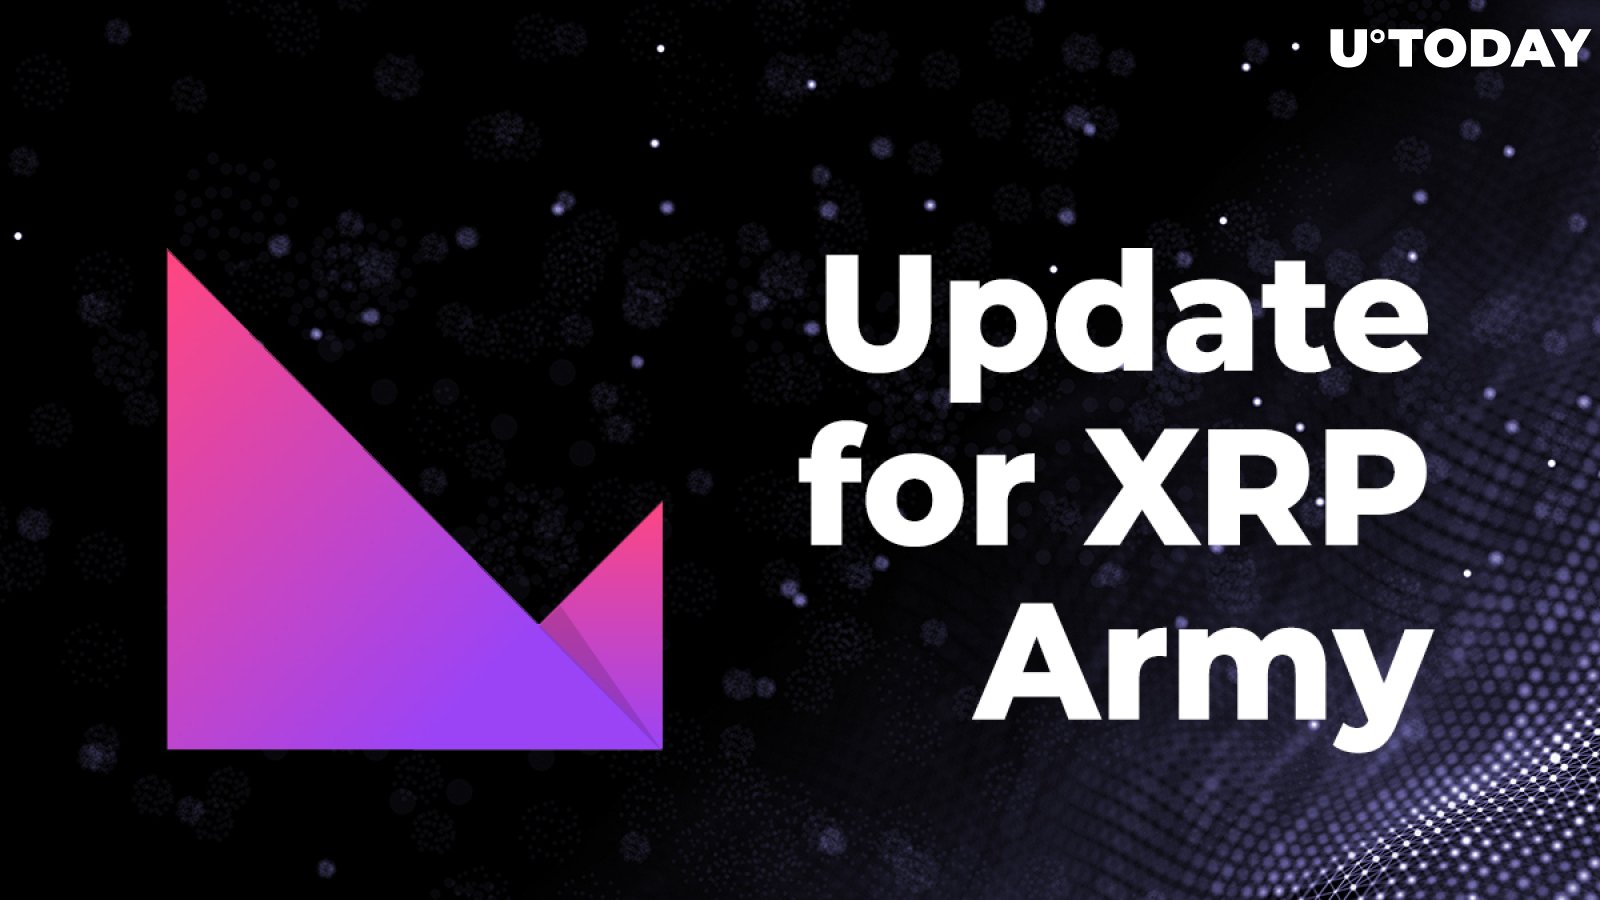 Klever Decentralized Wallet Releases Important Update for XRP Army with Version 4.0.10